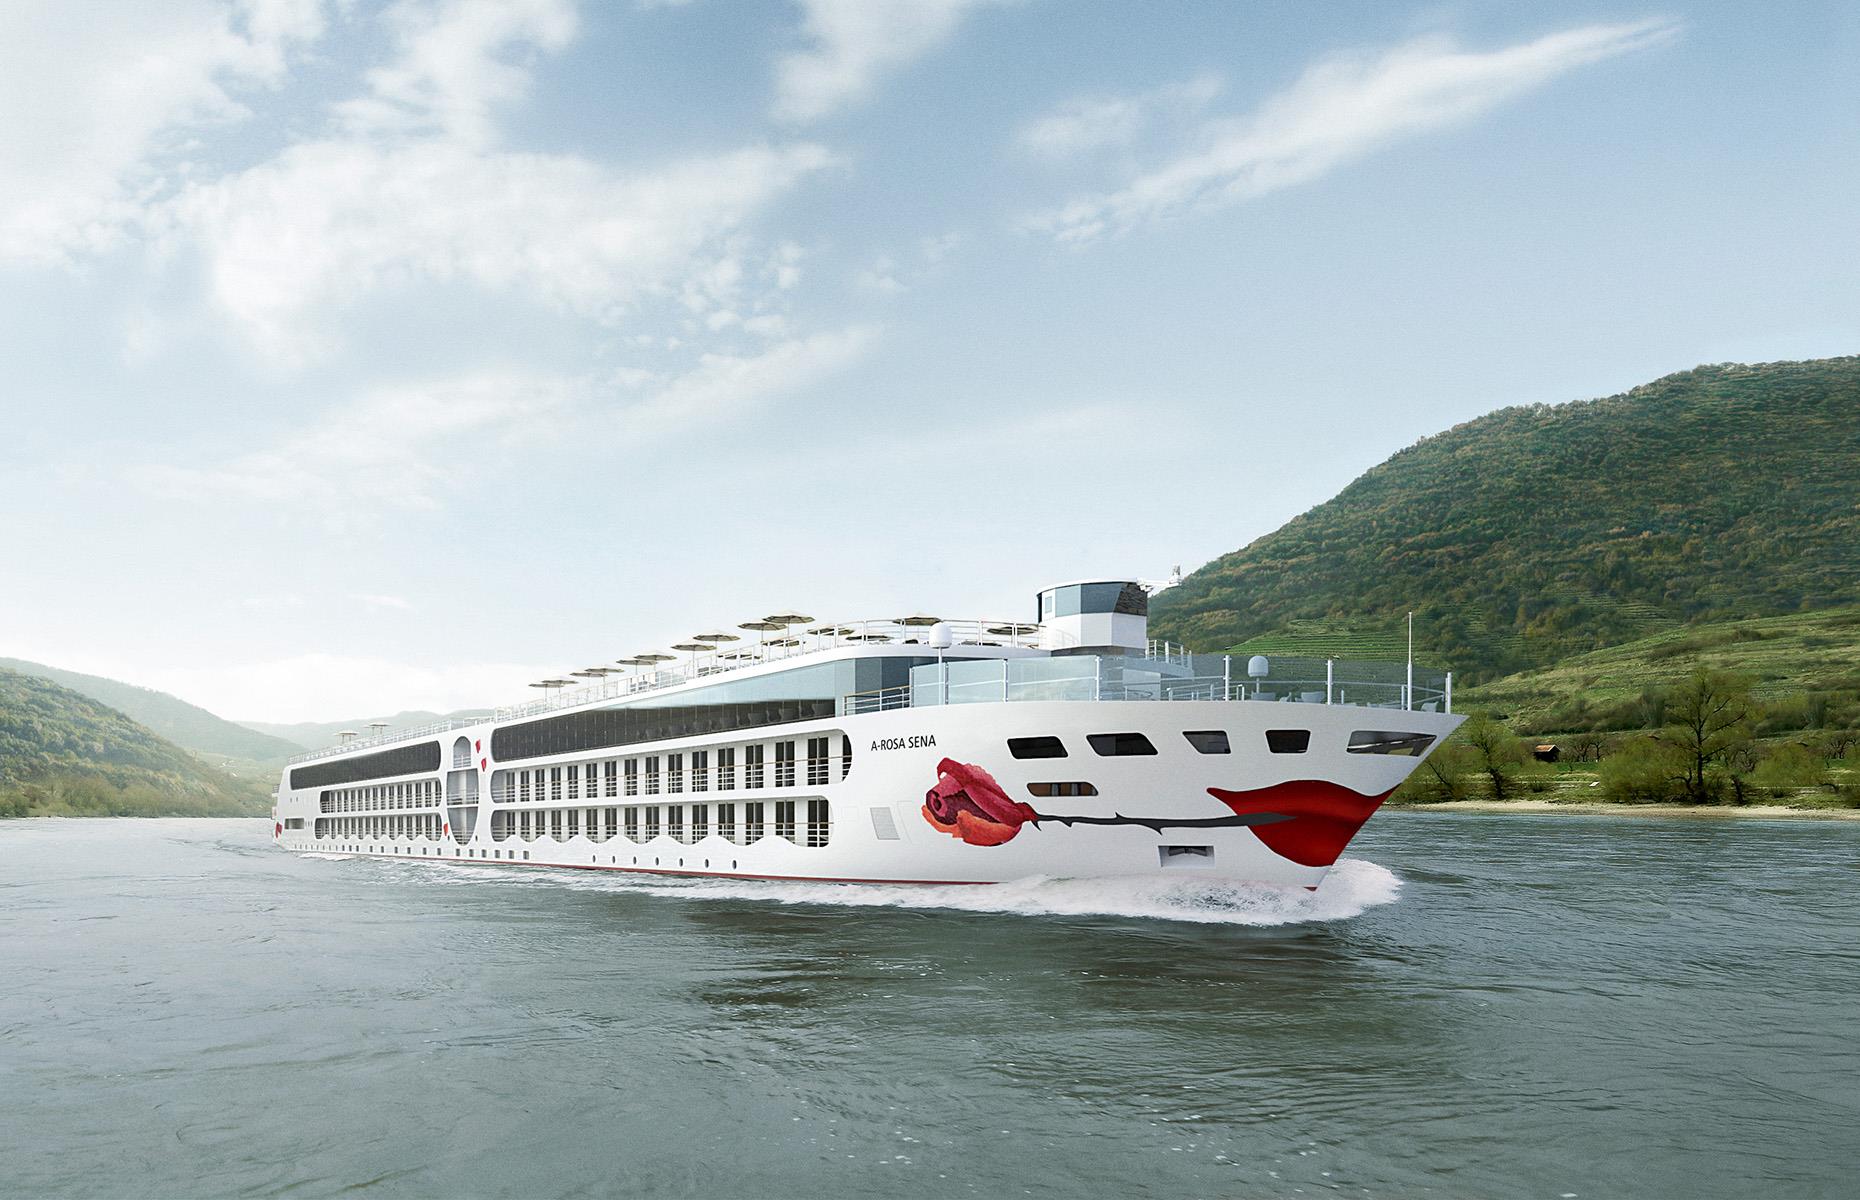 <p>River cruises are often seen as the preserve of couples, but change is afoot. In 2022, A-ROSA River Cruises launched <a href="https://www.arosa-cruises.com/river-cruises/a-rosa-fleet/a-rosa-sena.html">A-ROSA SENA</a>, the only river cruise ship in Europe to have a dedicated kids’ club room. AmaWaterways’ AmaMagna has a theatre area where children (and big kids) can watch movies and play games consoles, and Uniworld’s Generation Collection cruises offer kid-friendly activities and excursions.</p>